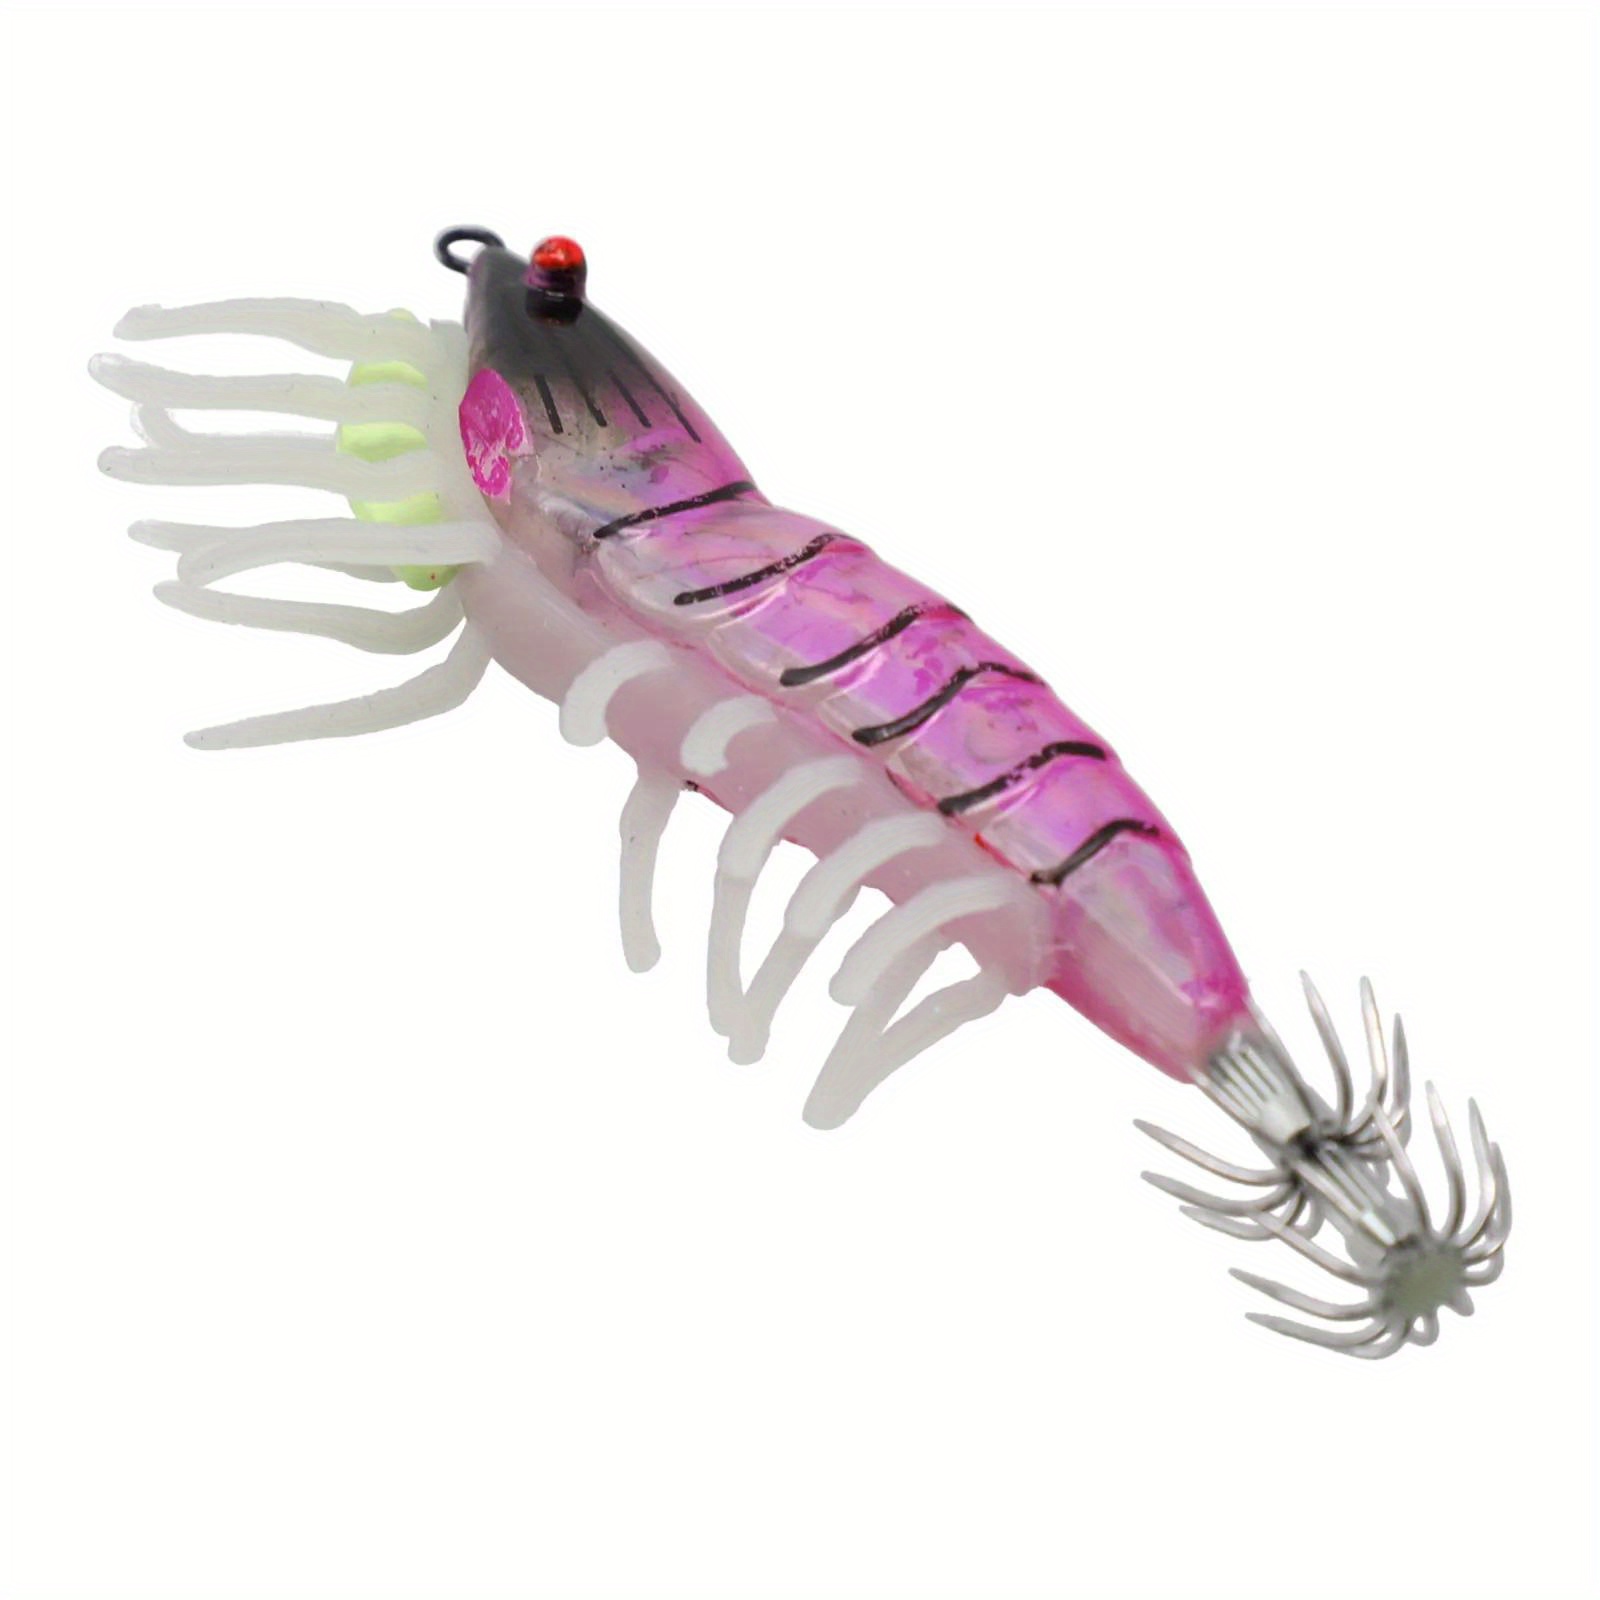 10pcs/lot Luminous Shrimp Soft Bait with Hooks for Carp Fishing - Realistic  Simulation, Silicone Material * in the Dark